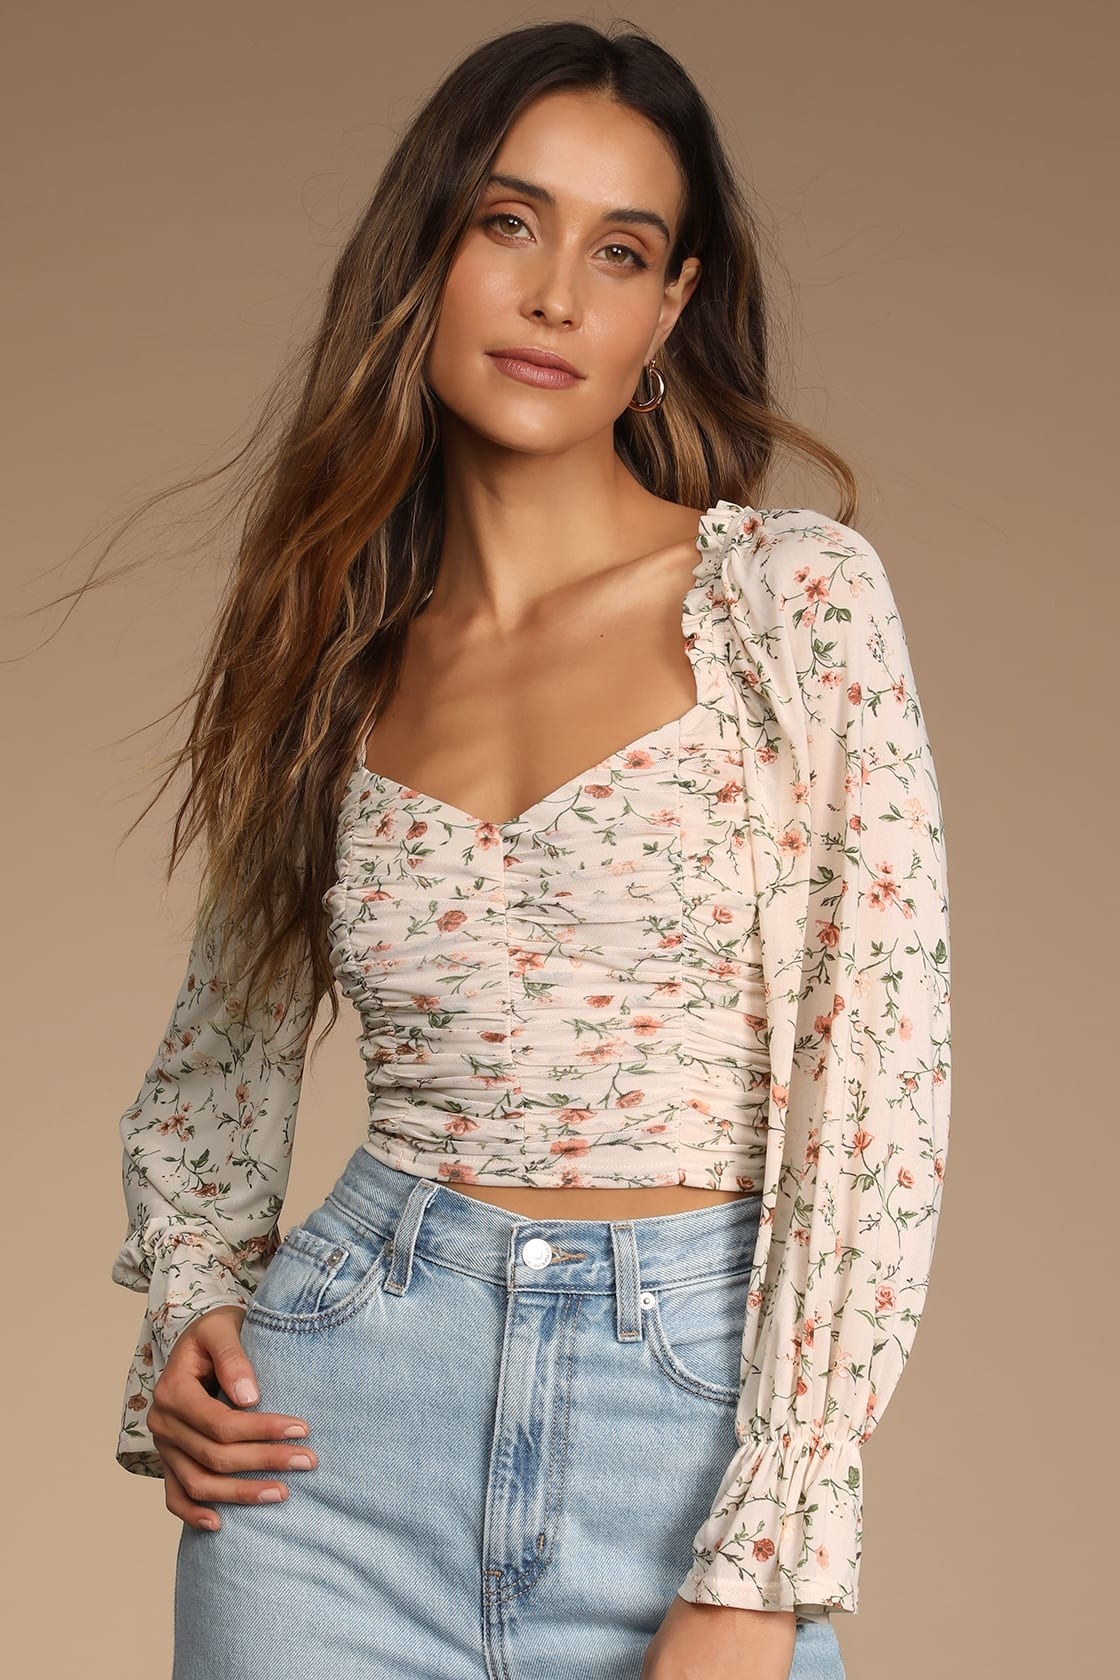 Model wearing floral white blouse with pink and green flowers and jeans